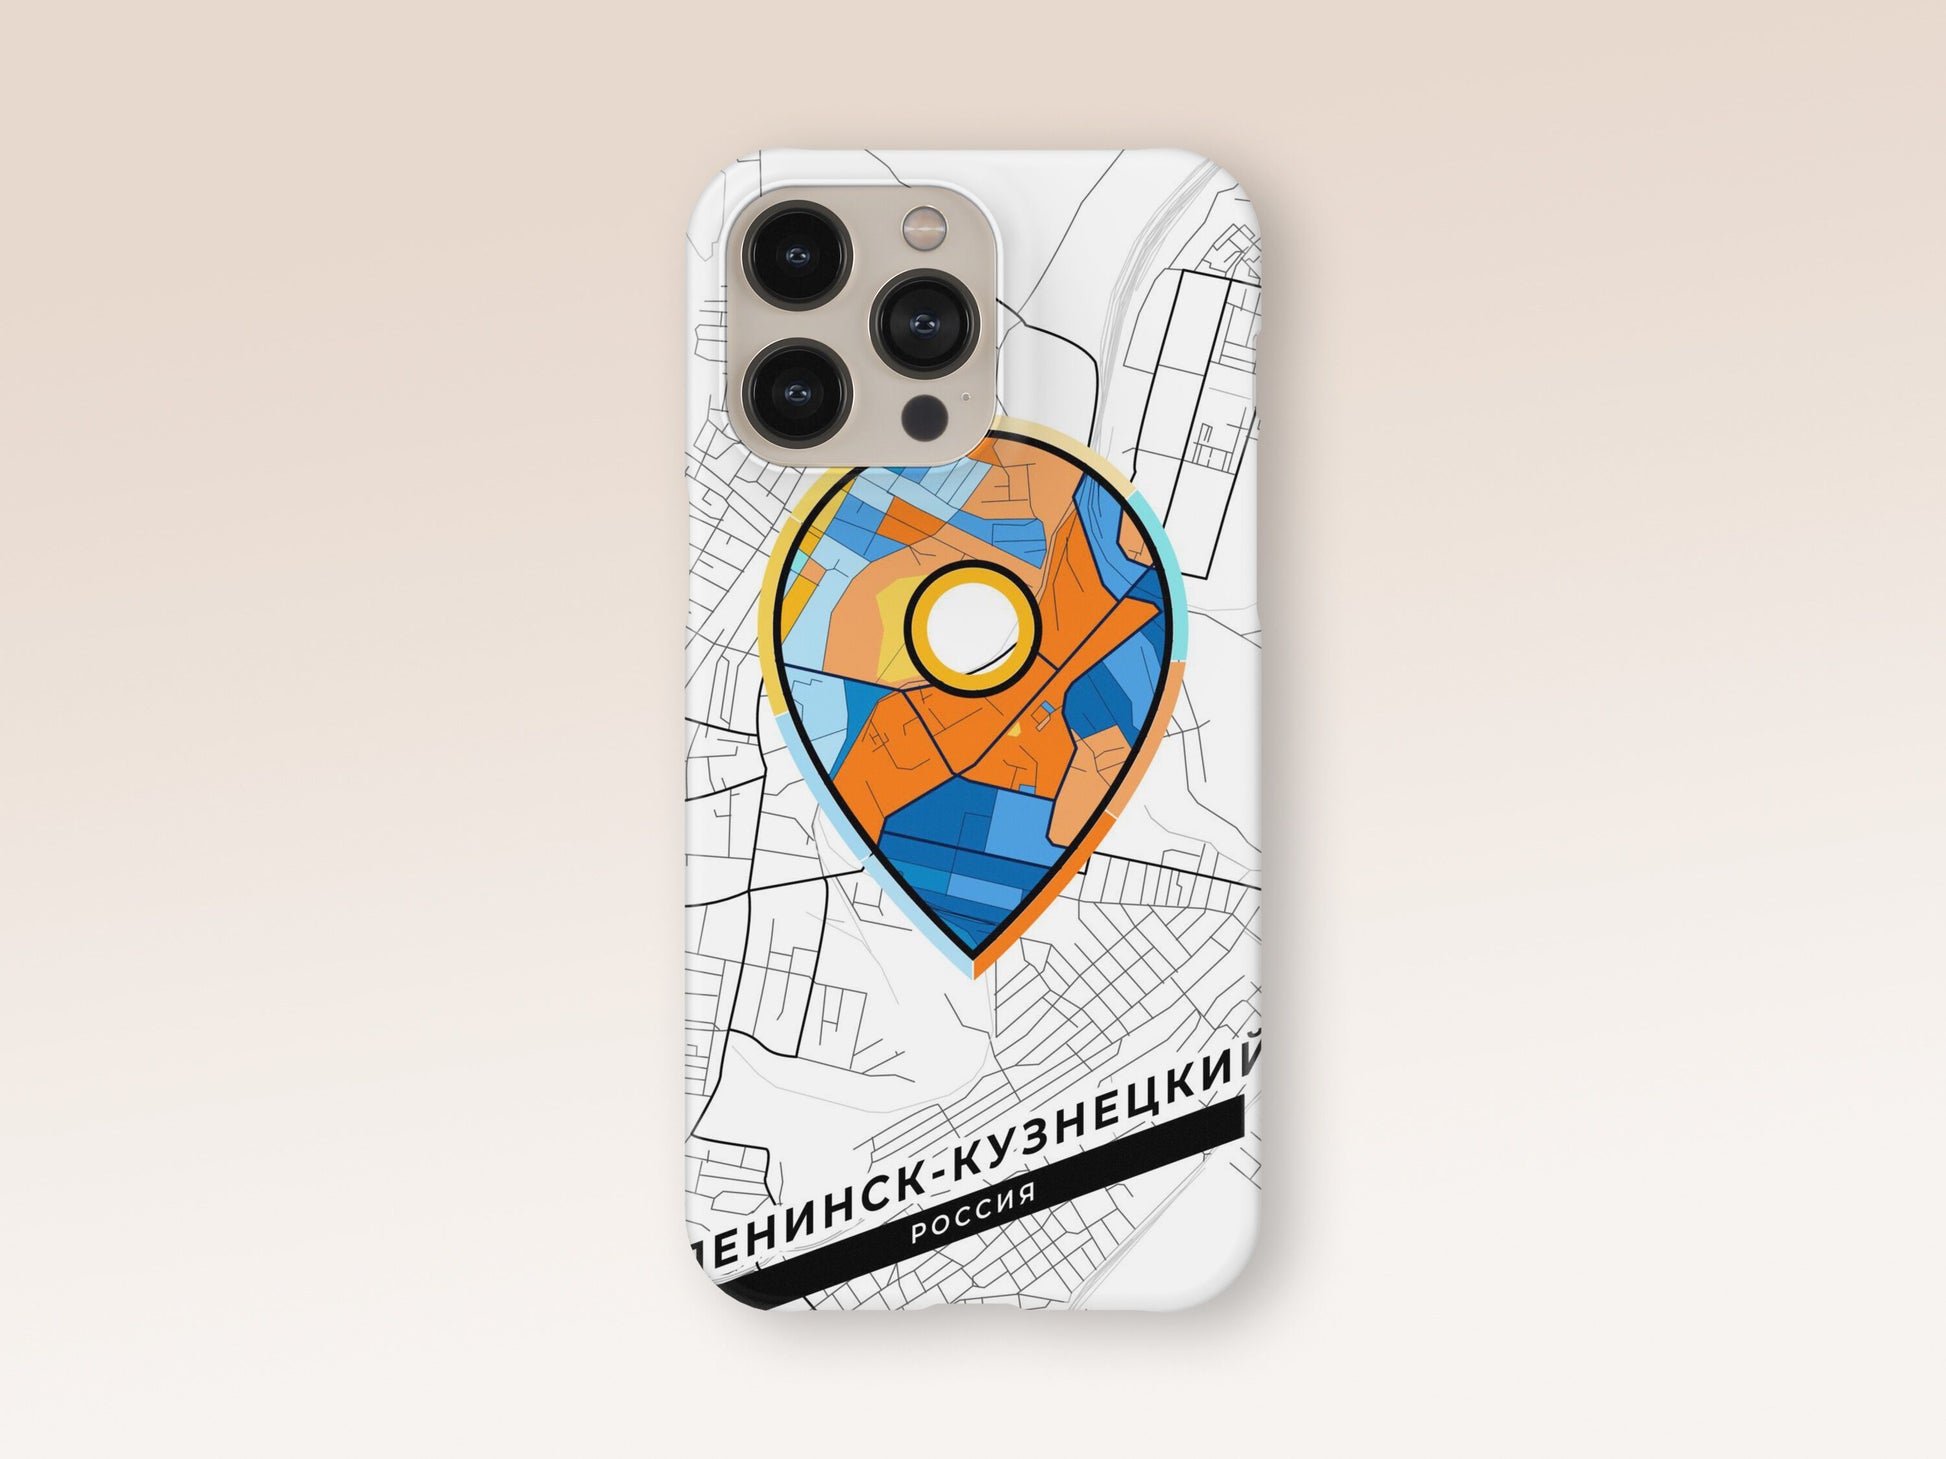 Leninsk-Kuznetsky Russia slim phone case with colorful icon. Birthday, wedding or housewarming gift. Couple match cases. 1